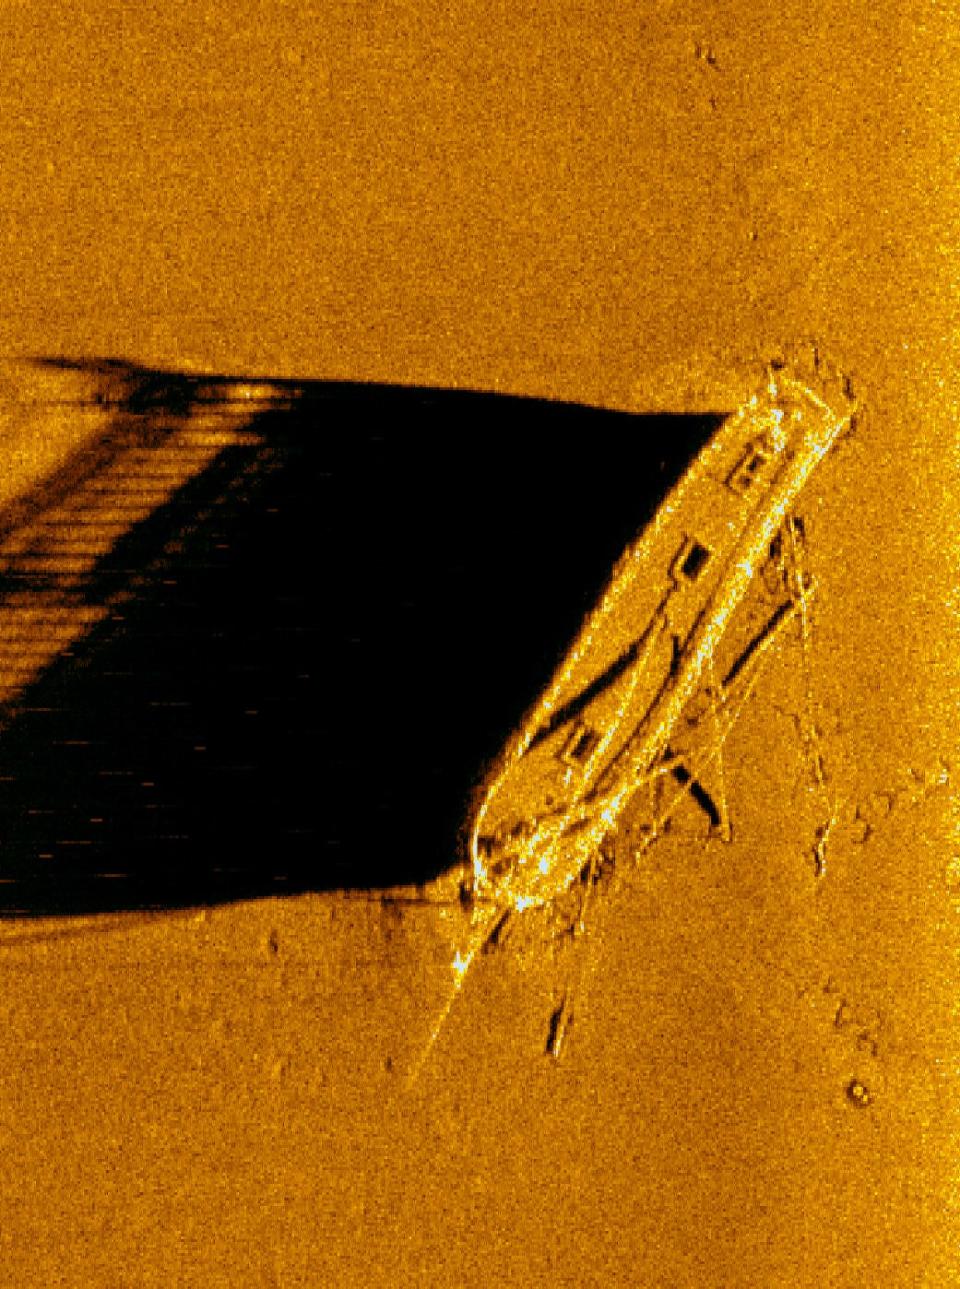 A sonar image of the schooner Gallinipper shows it resting in 210 feet of water, inside the Wisconsin Shipwreck Coast National Marine Sanctuary in Lake Michigan. Built in 1832, the Gallinipper is the oldest discovered shipwreck in Wisconsin waters.